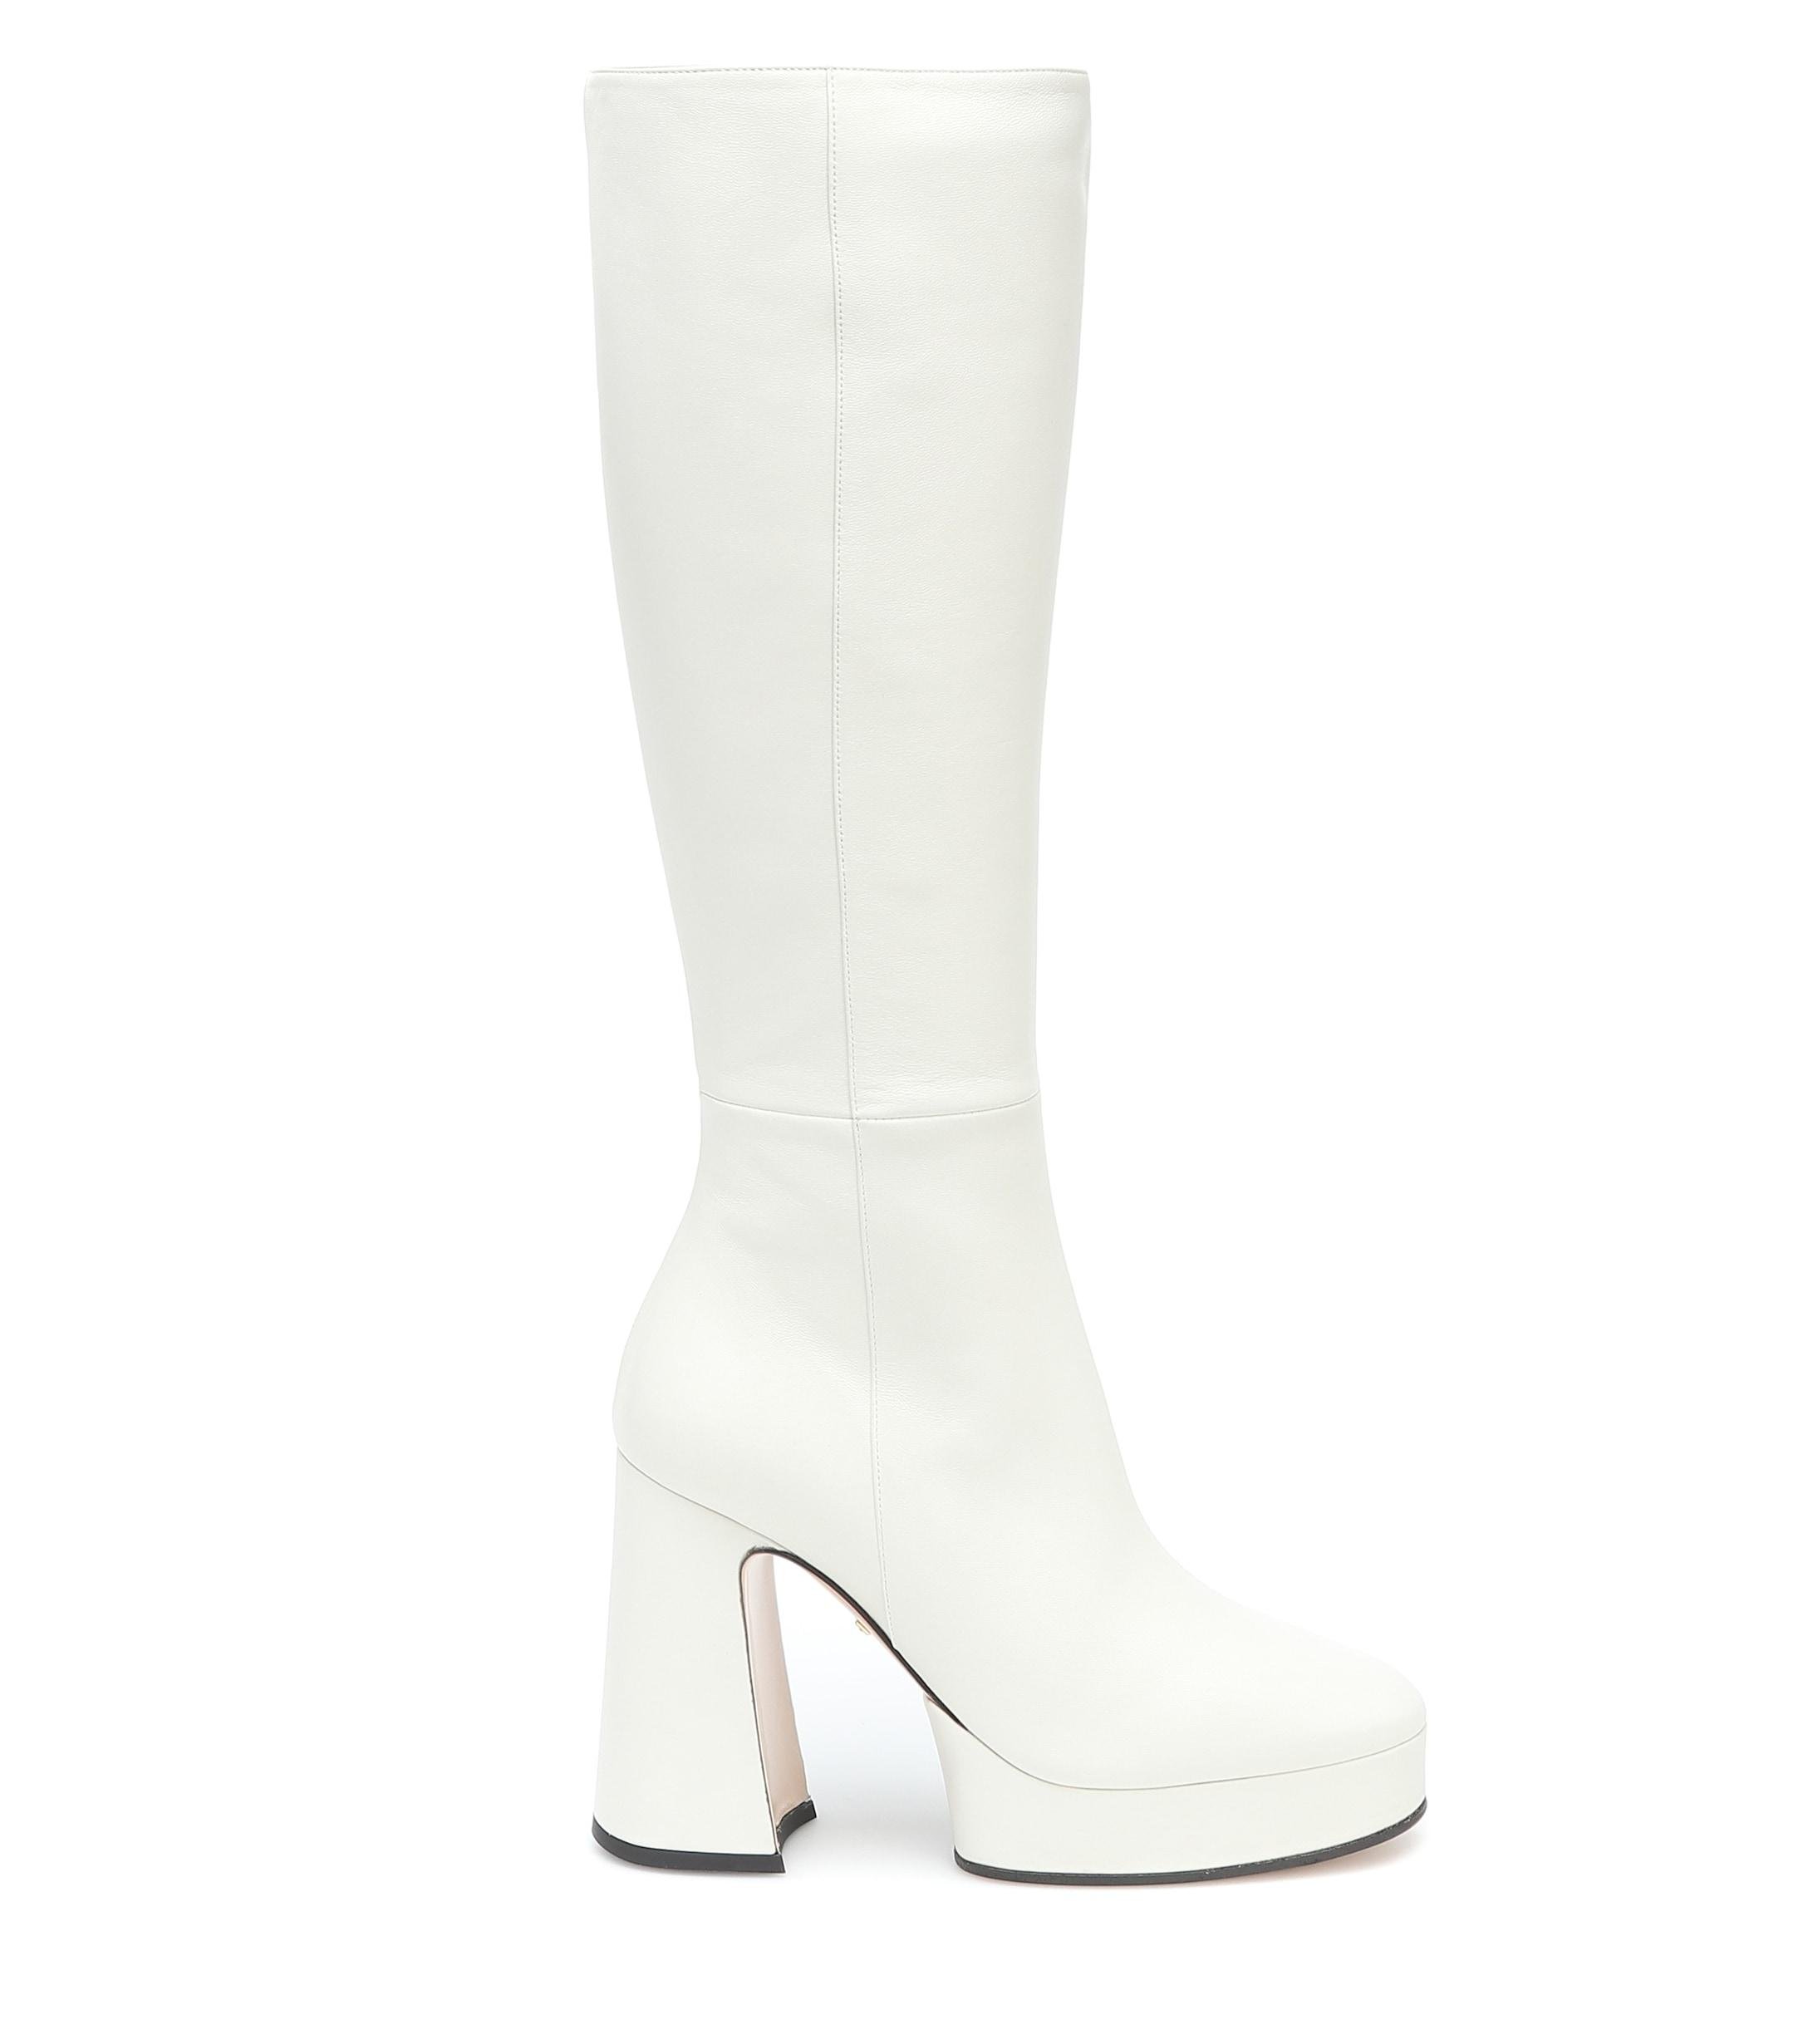 Gucci Madame Leather Knee-high Platform Boots | Lyst